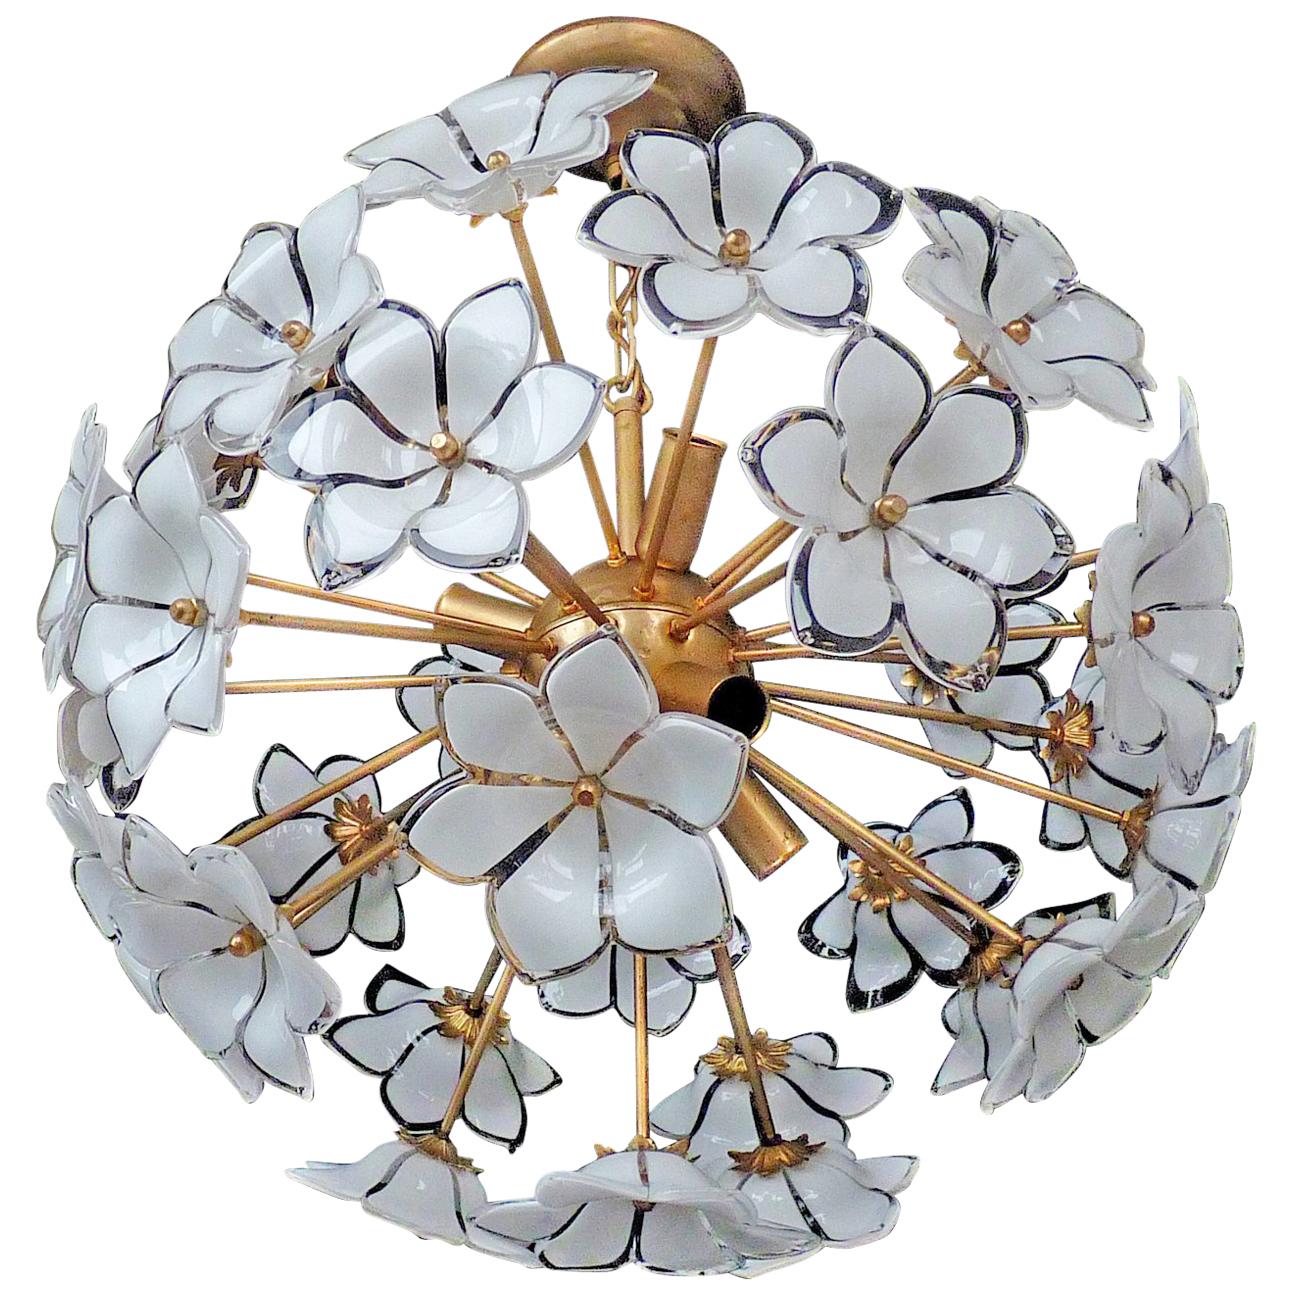 Vintage midcentury Italian Murano flower bouquet attributed to Venini. Art-glass with hand blown white and clear art glass flowers and gilt brass. Pair also available.
Measures:
Diameter 20 in/ 50 cm
Height 27.5 in (chain=70 cm
Weight 16 lb/7 Kg
6